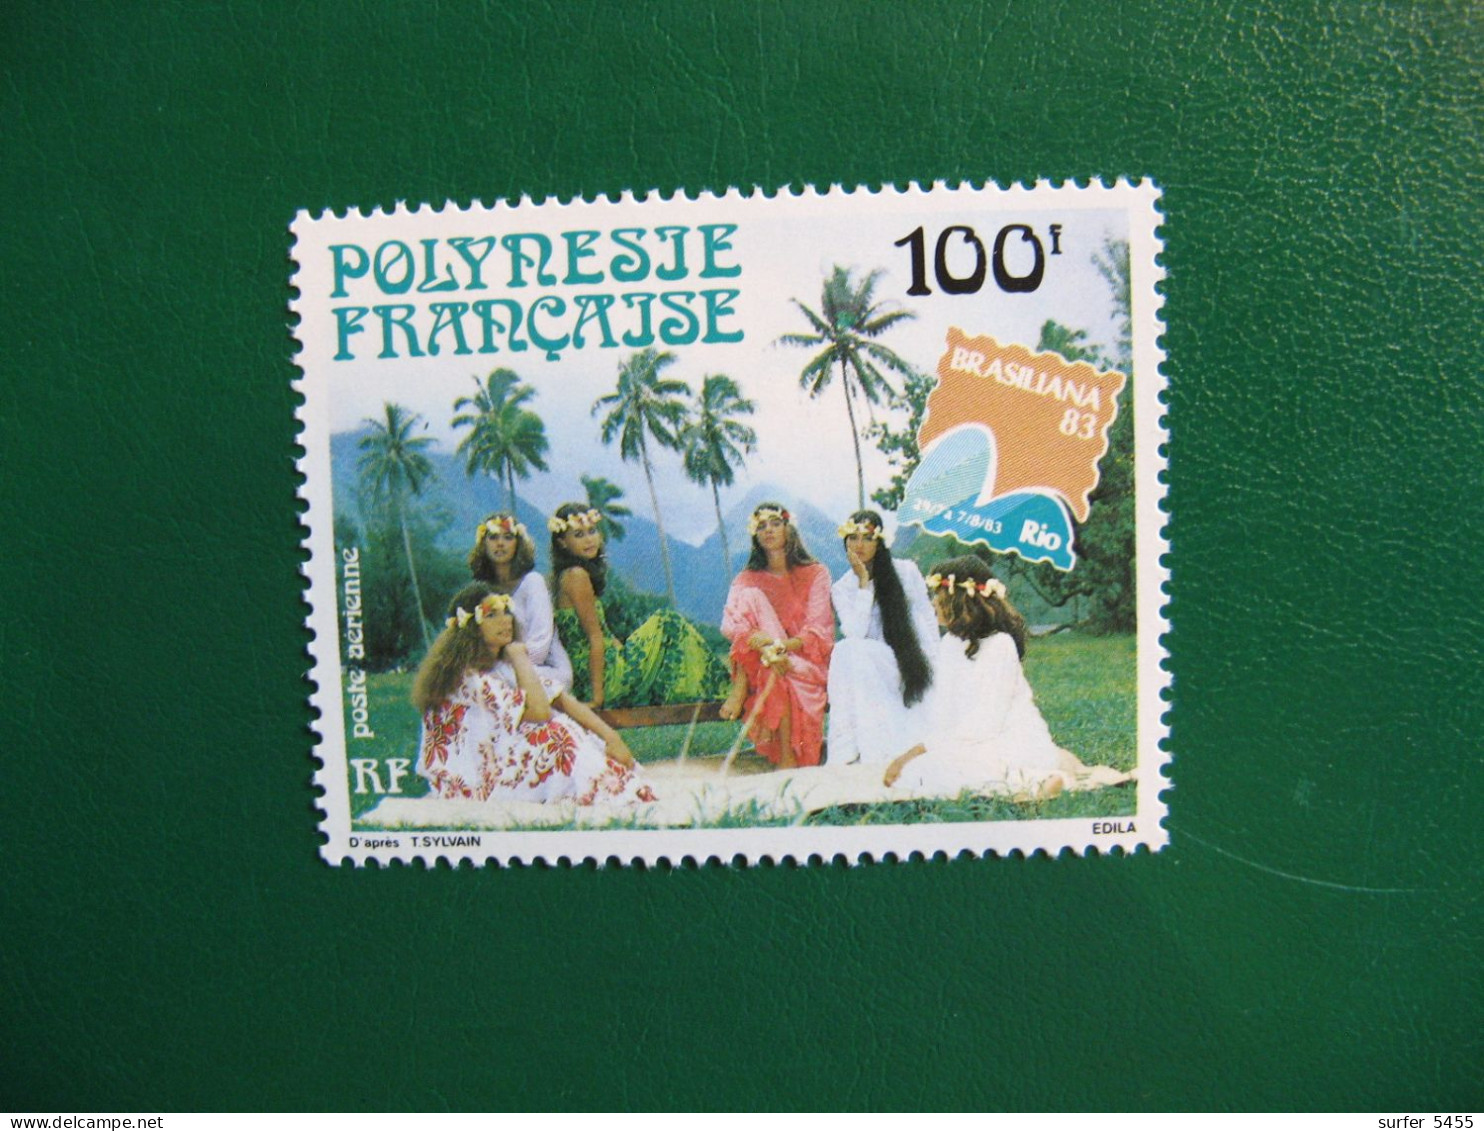 P0LYNESIE PO AERIENNE N° 176 TIMBRE NEUF ** LUXE - MNH - SERIE COMPLETE - FACIALE 0,84 EURO - Unused Stamps